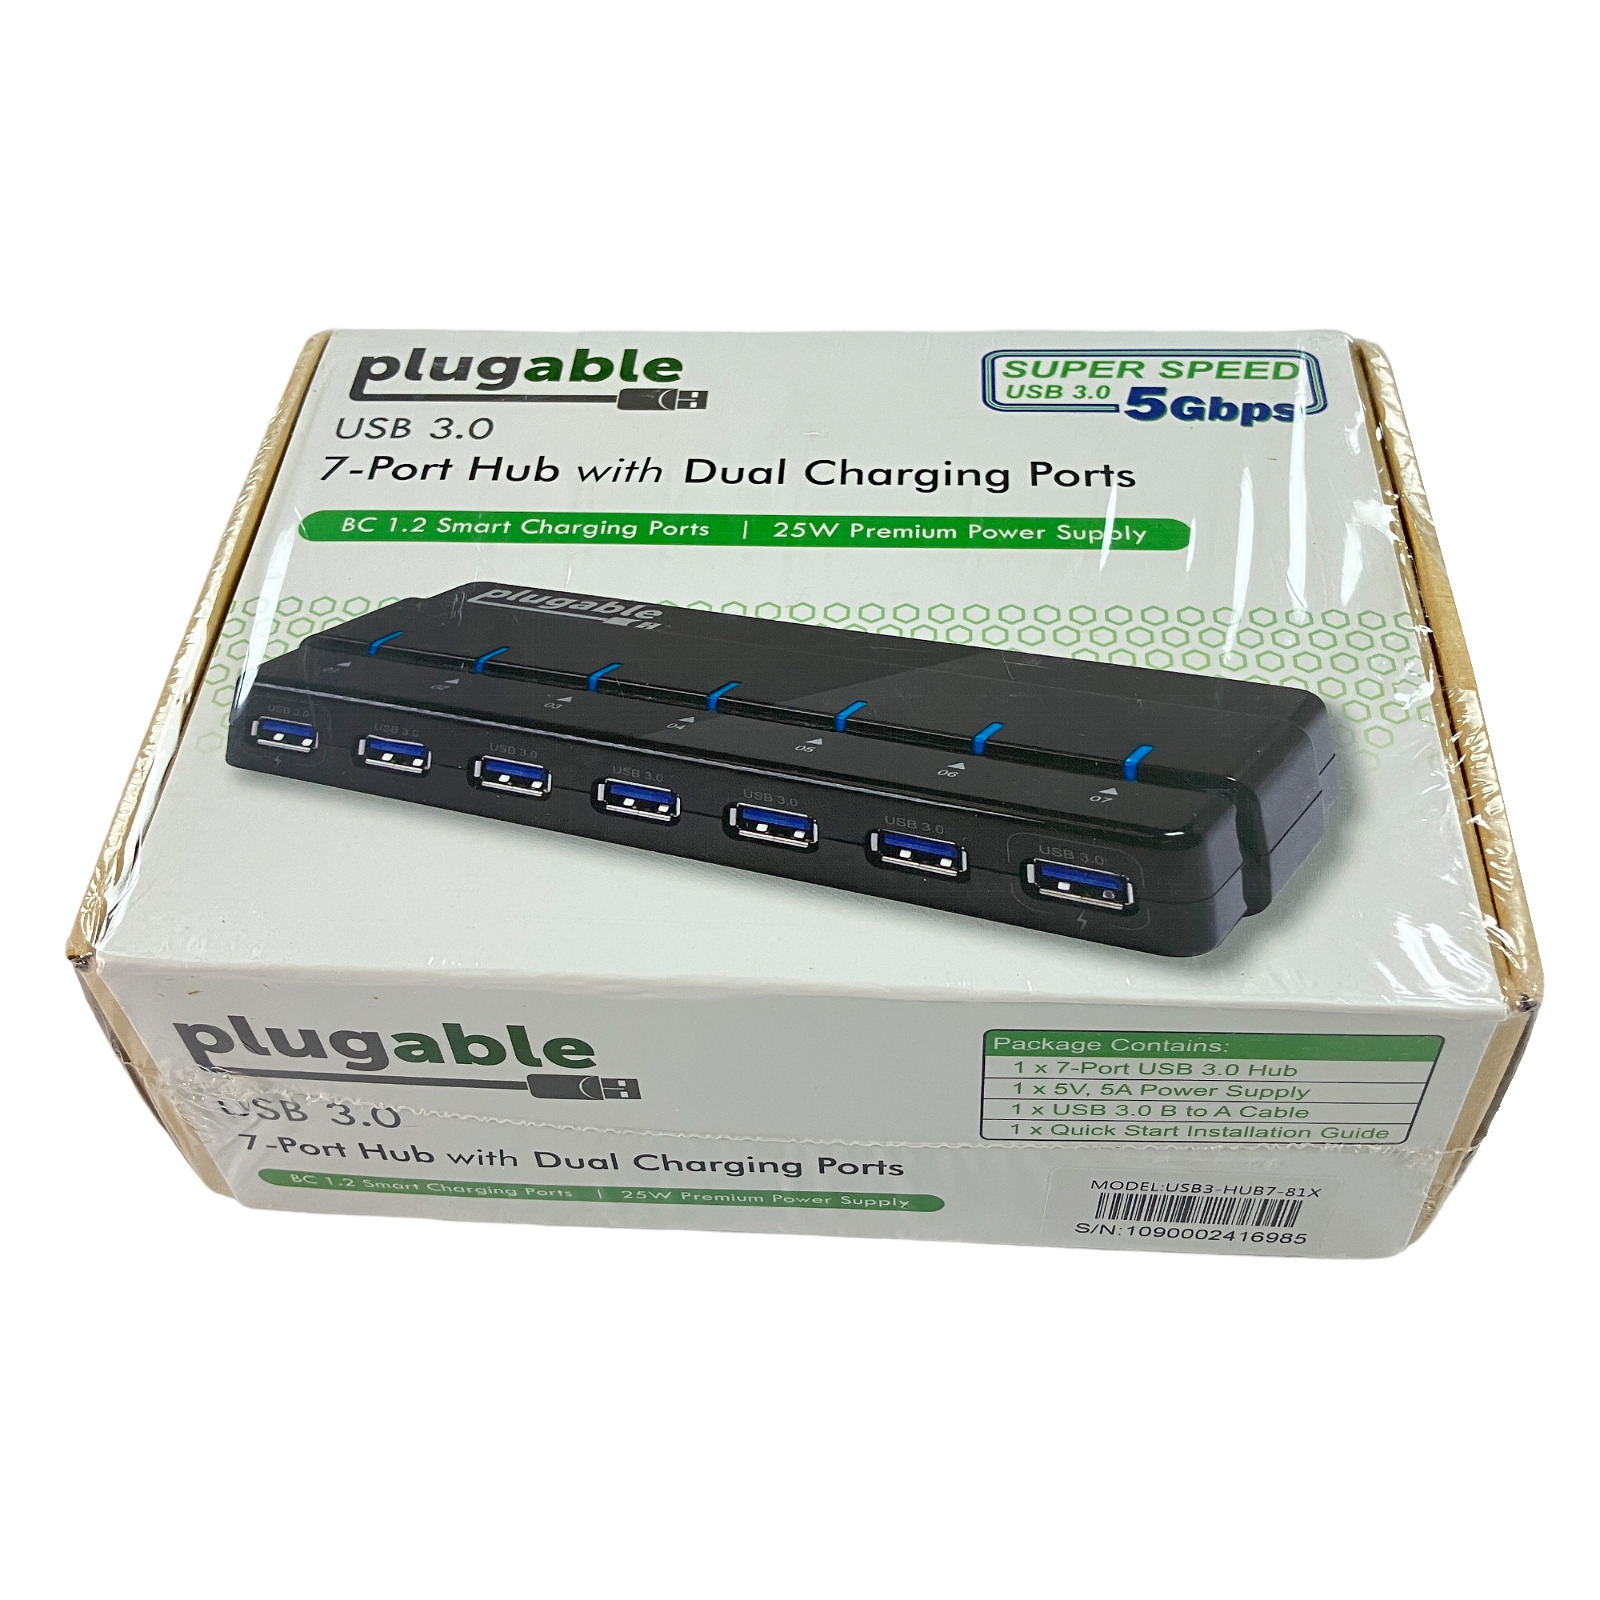 Plugable 7 Port USB 3.0 Hub with Dual Charging Ports SUPER SPEED 5 Gbps New